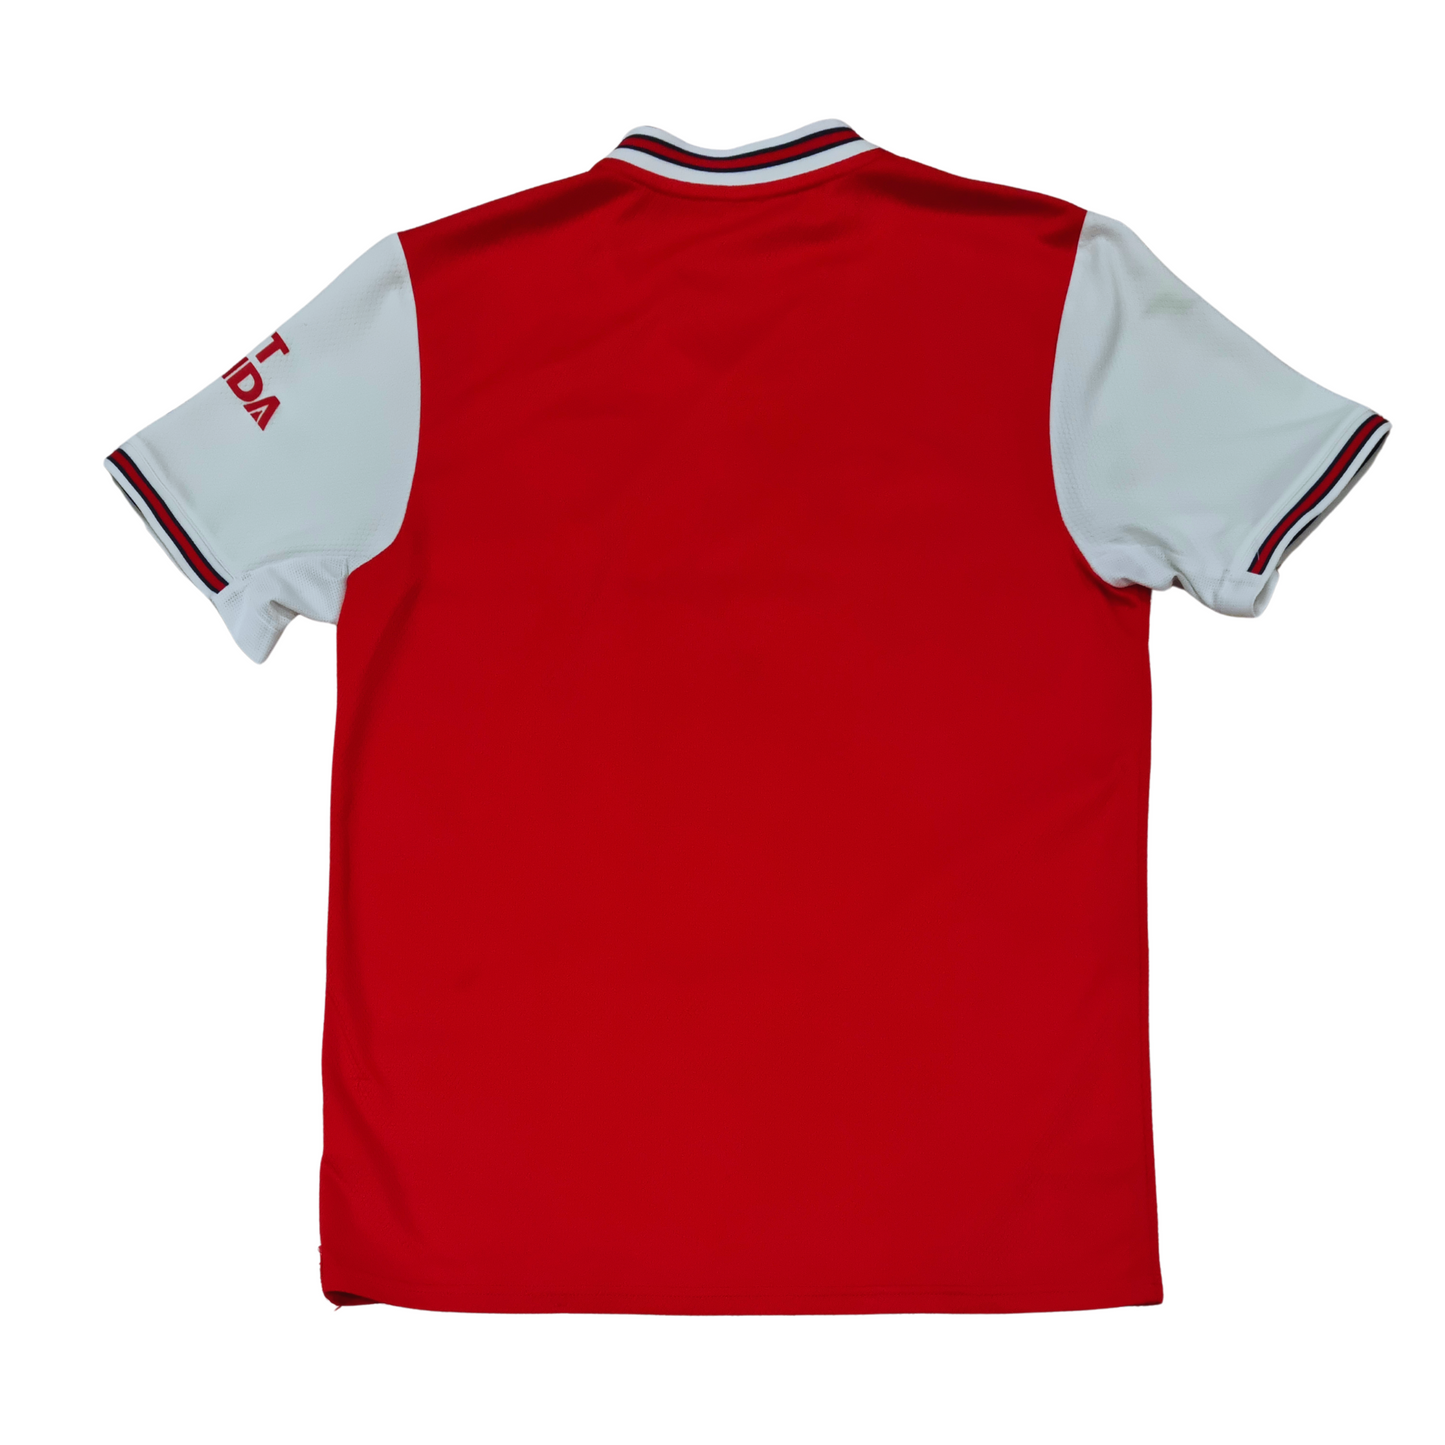 A red and white Arsenal 2019/20 Home Jersey featuring the Adidas product tag.